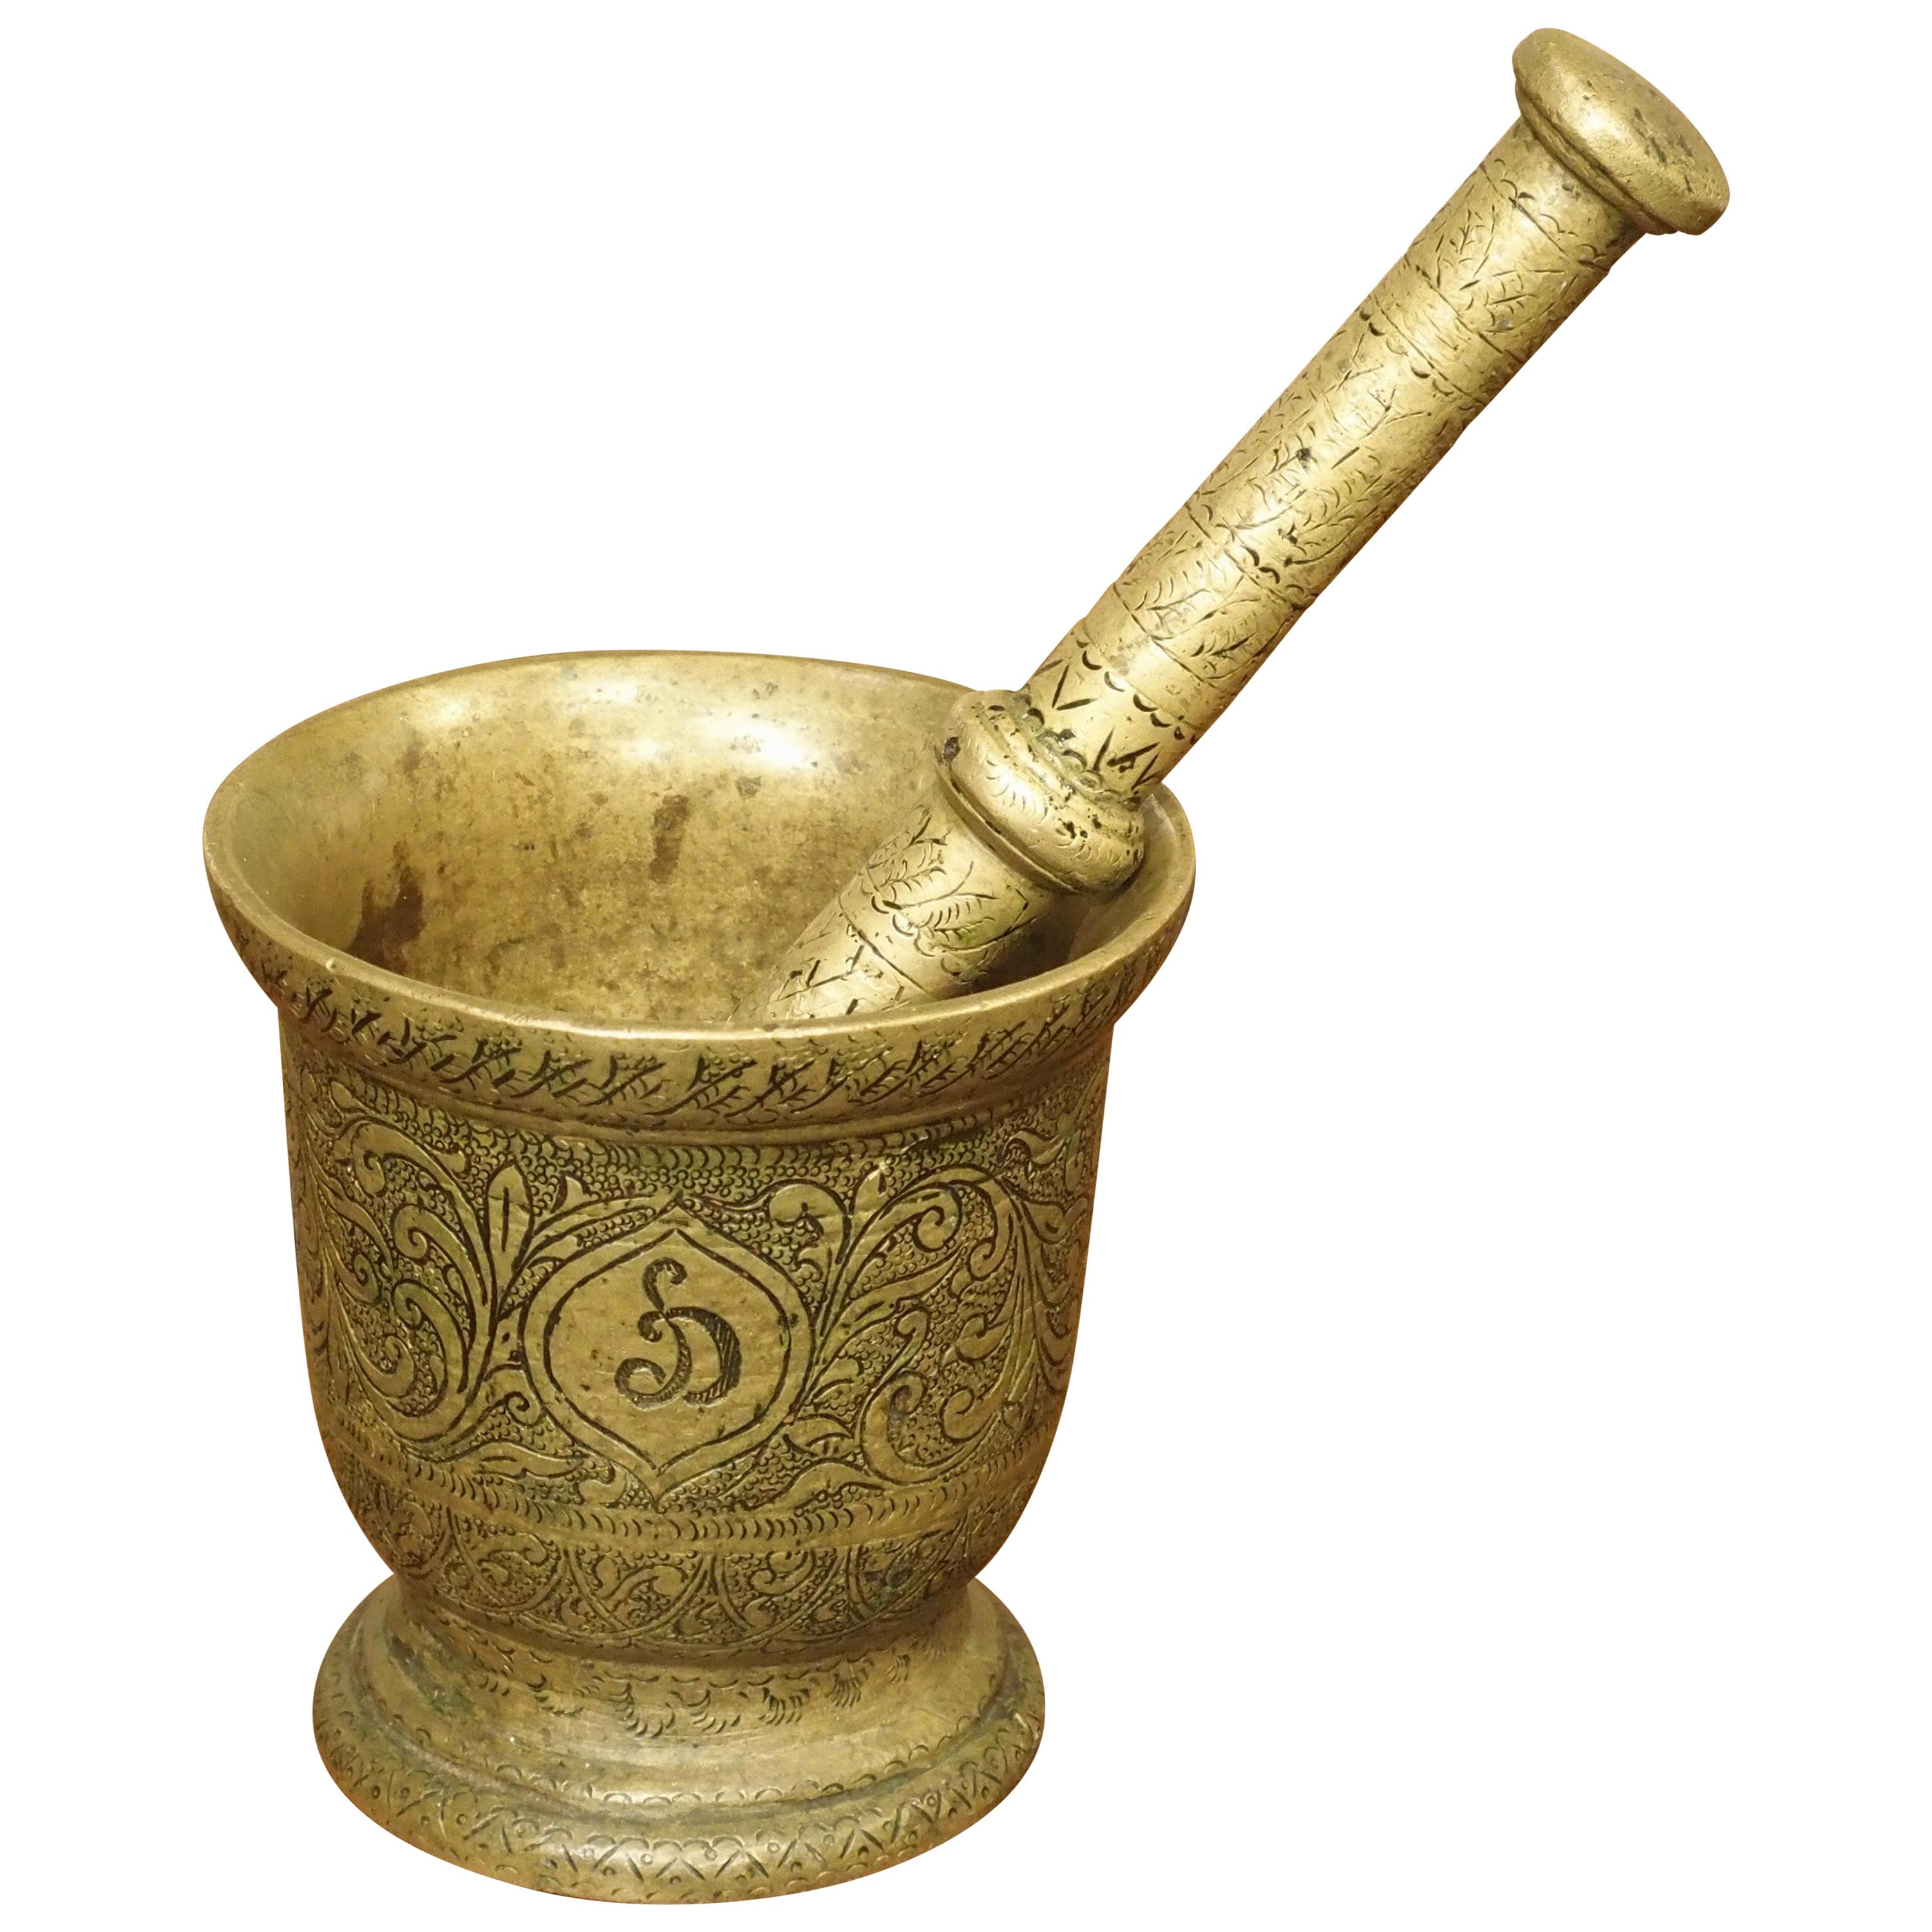 Engraved Antique French Bronze Mortar and Pestle, 17th Century